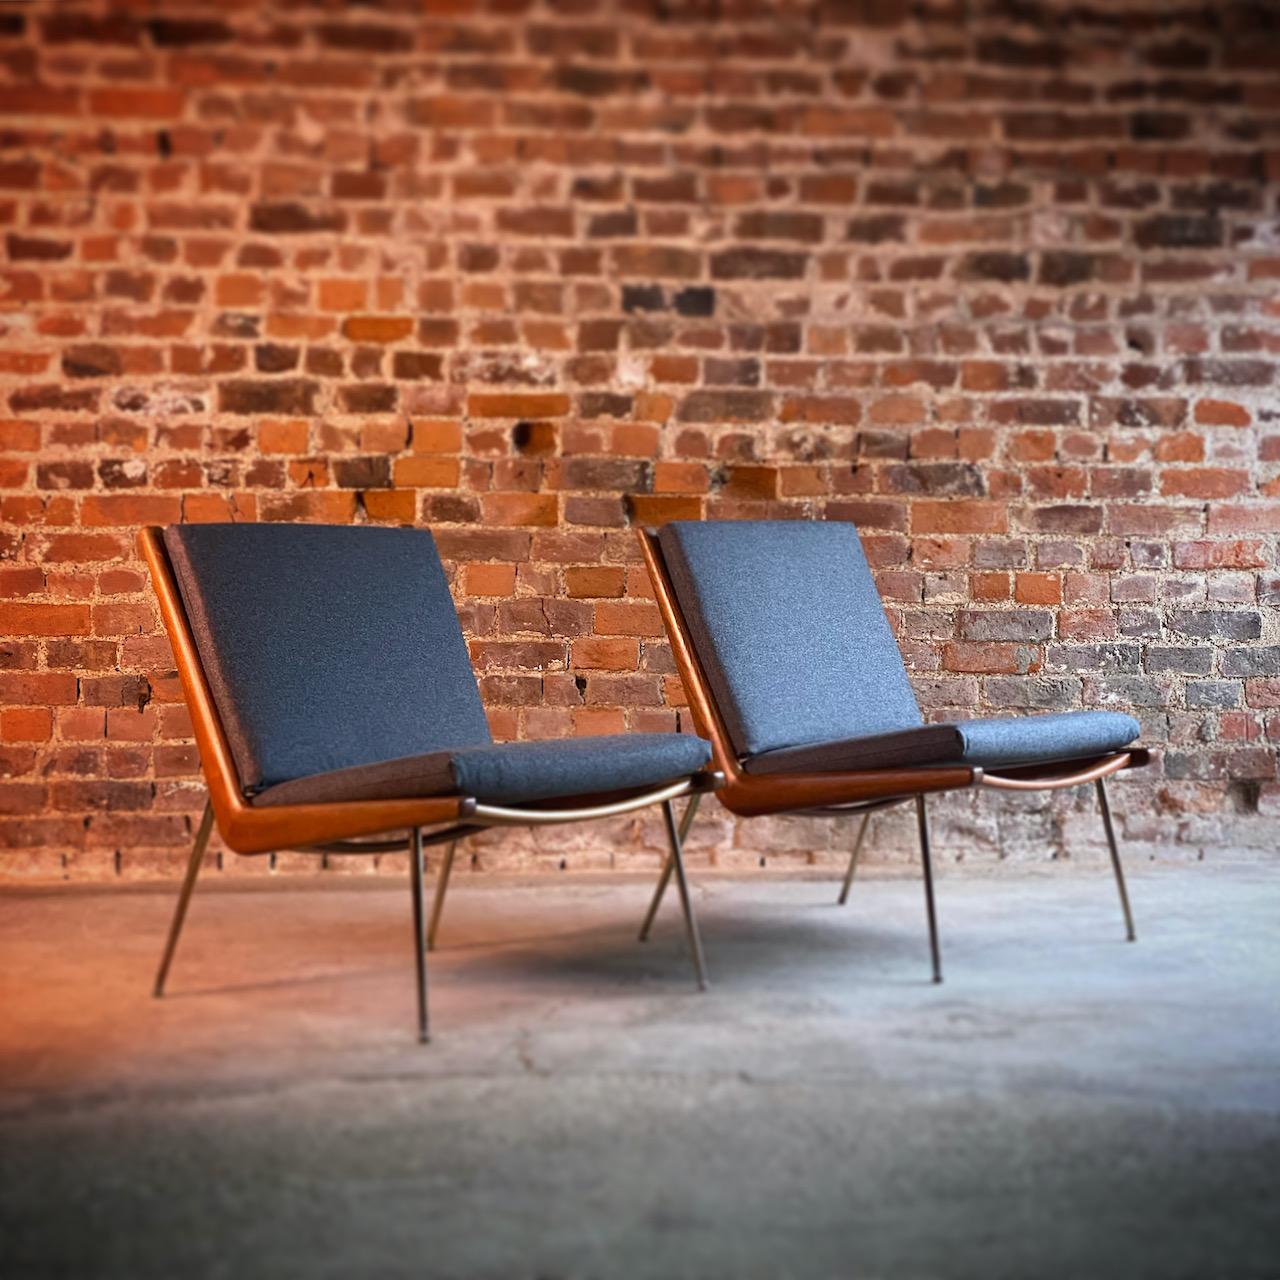 Peter Hvidt & Orla Molgaard-Nielsen Boomerang Chairs FD134 by France & Son 1955

Midcentury Danish Peter Hvidt & Orla Mølgaard-Nielsen Model FD-134 Boomerang chairs Denmark circa 1955, The beautifully sculpted and quite unmistakeable boomerang